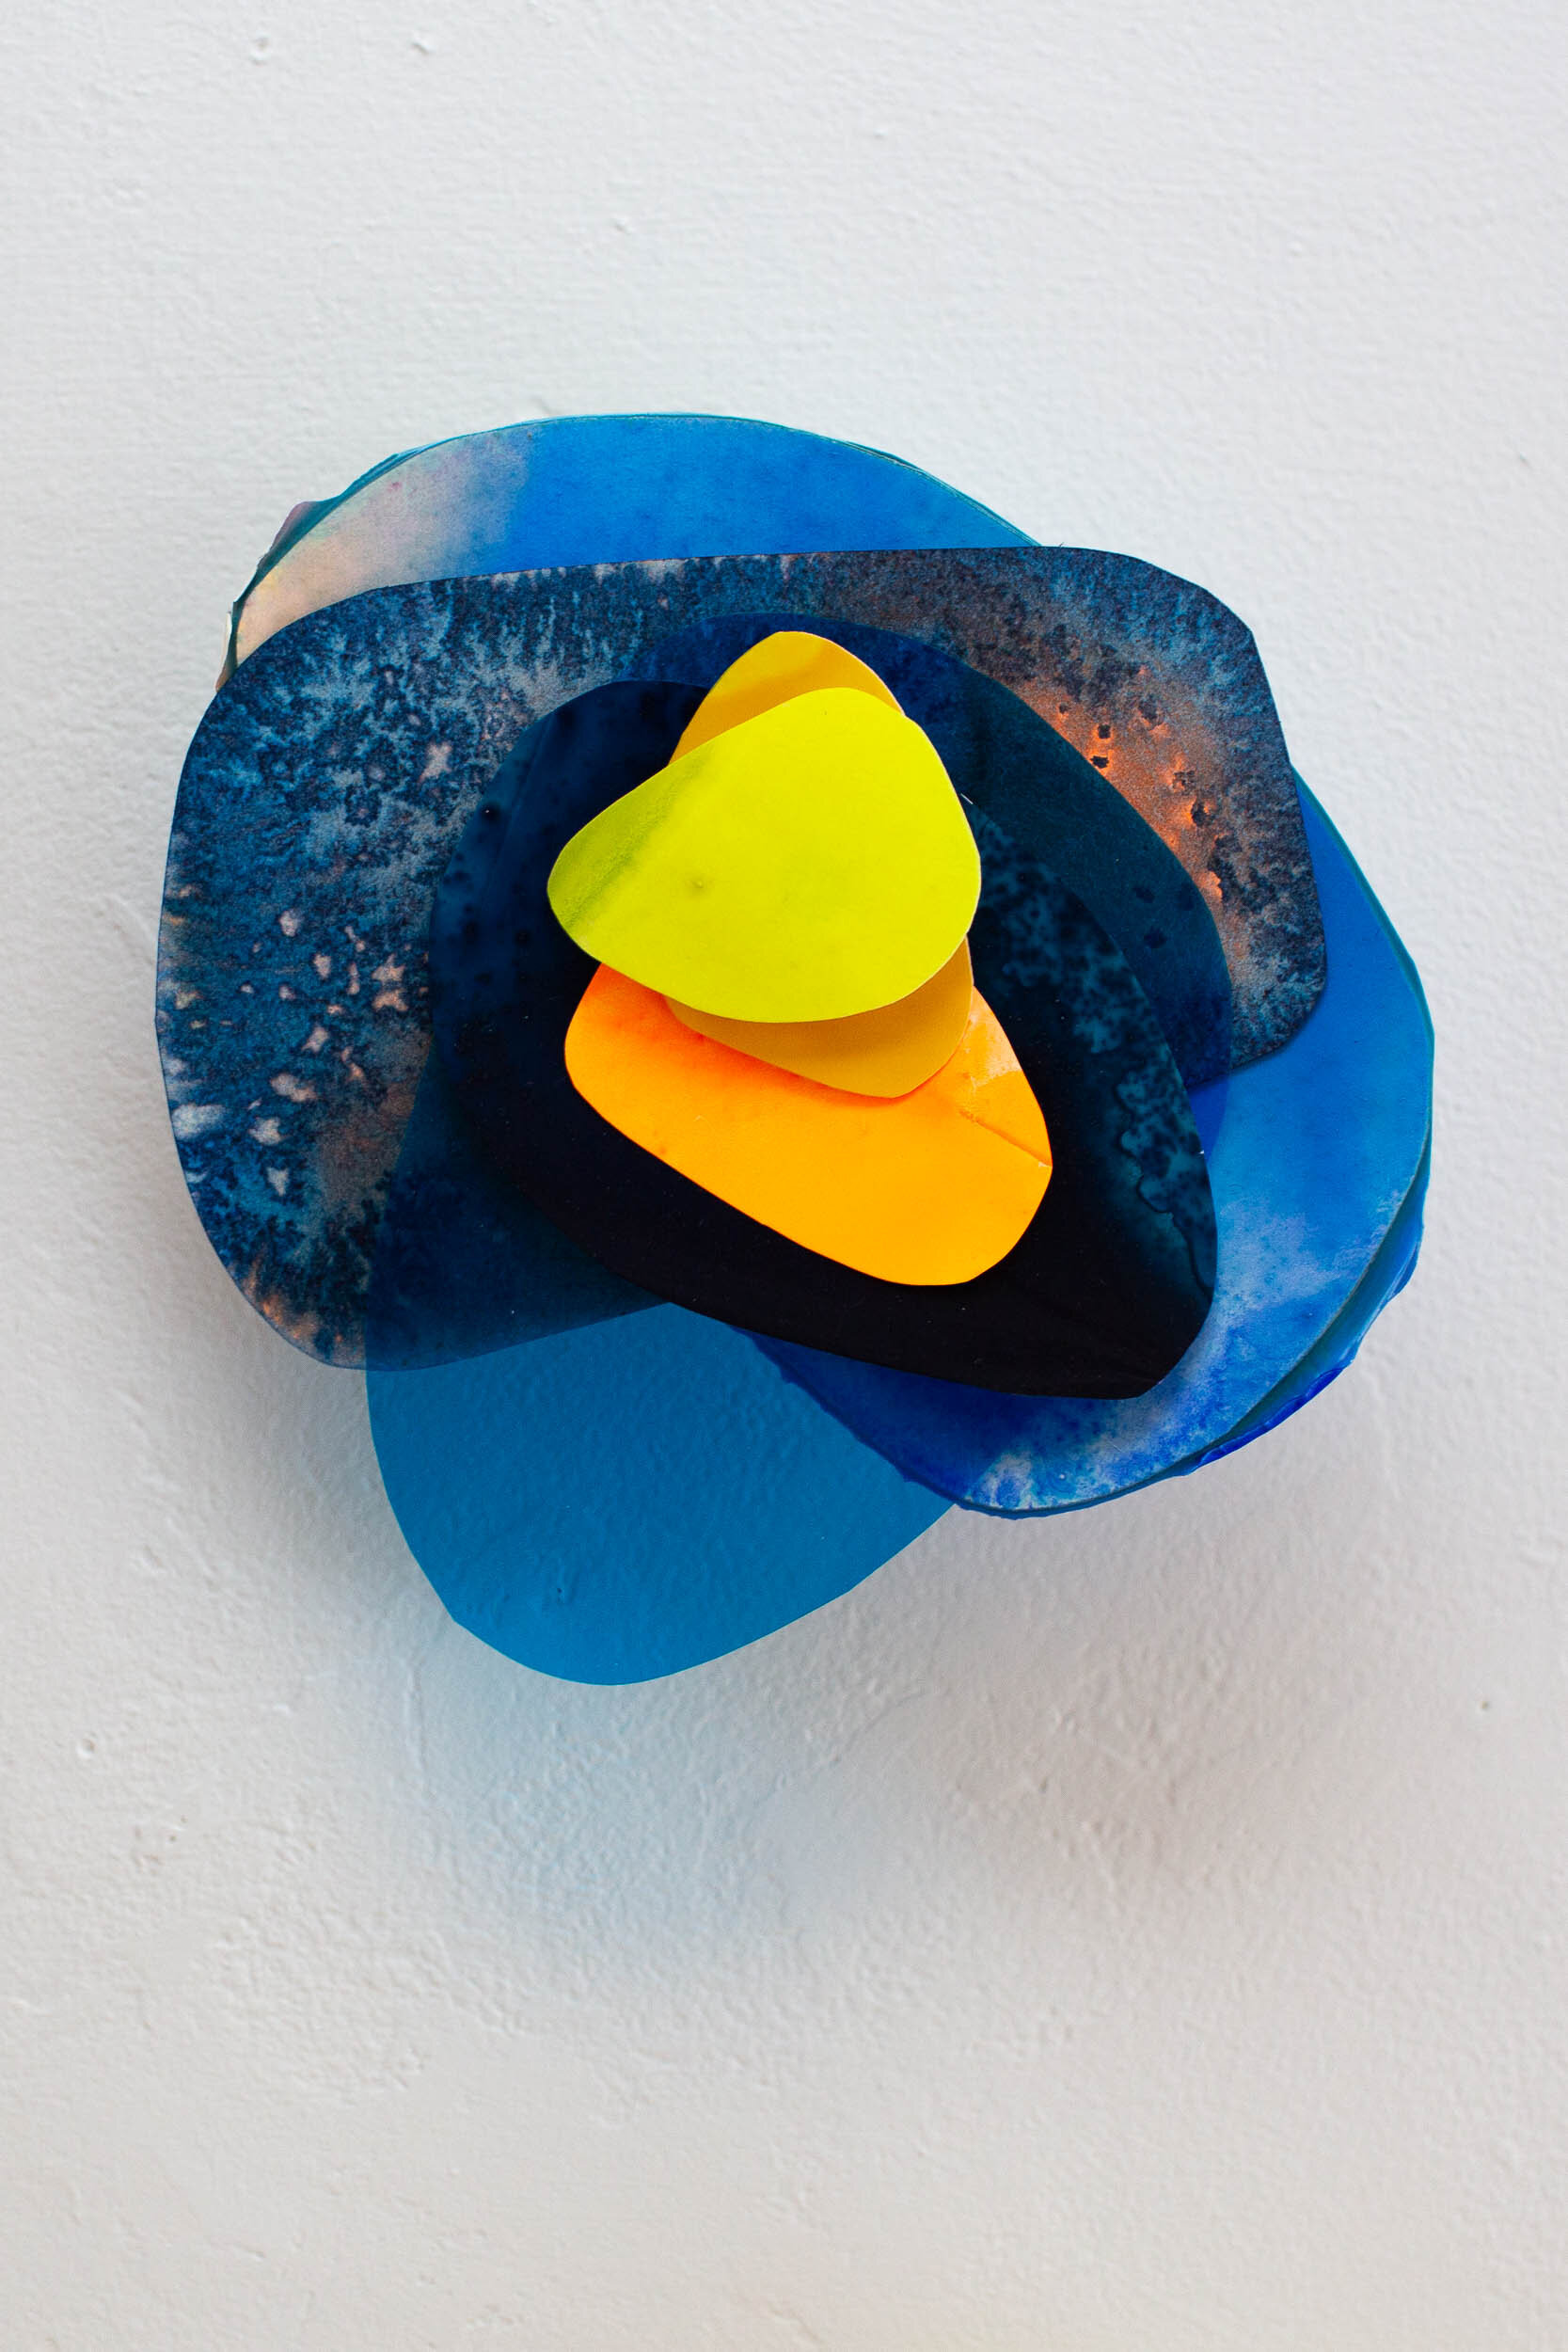    Wall Flowers: Blue Forms  , 2020, acrylic and mixed media on Yupo, watercolor and photo film with magnets (layer arrangement variable), 9 x 9 x 2 in.   